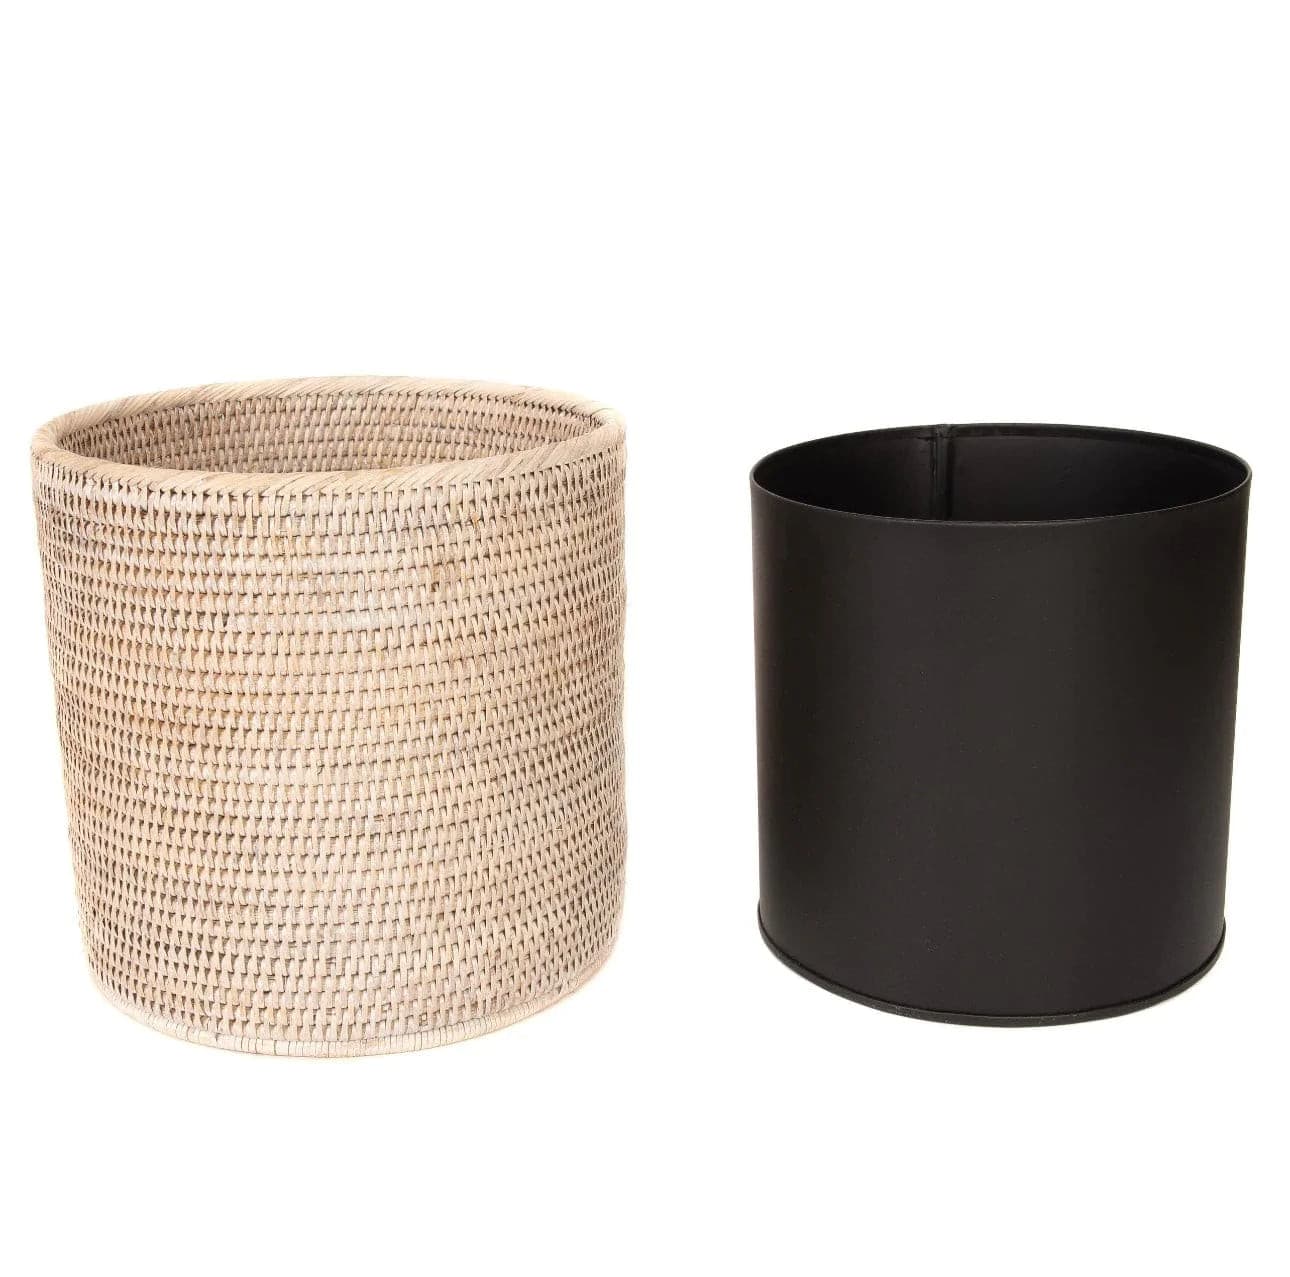 https://cdn.shopify.com/s/files/1/0339/3830/9257/products/rattan-round-waste-basket-with-metal-iiner-38806390767842.webp?v=1691781034